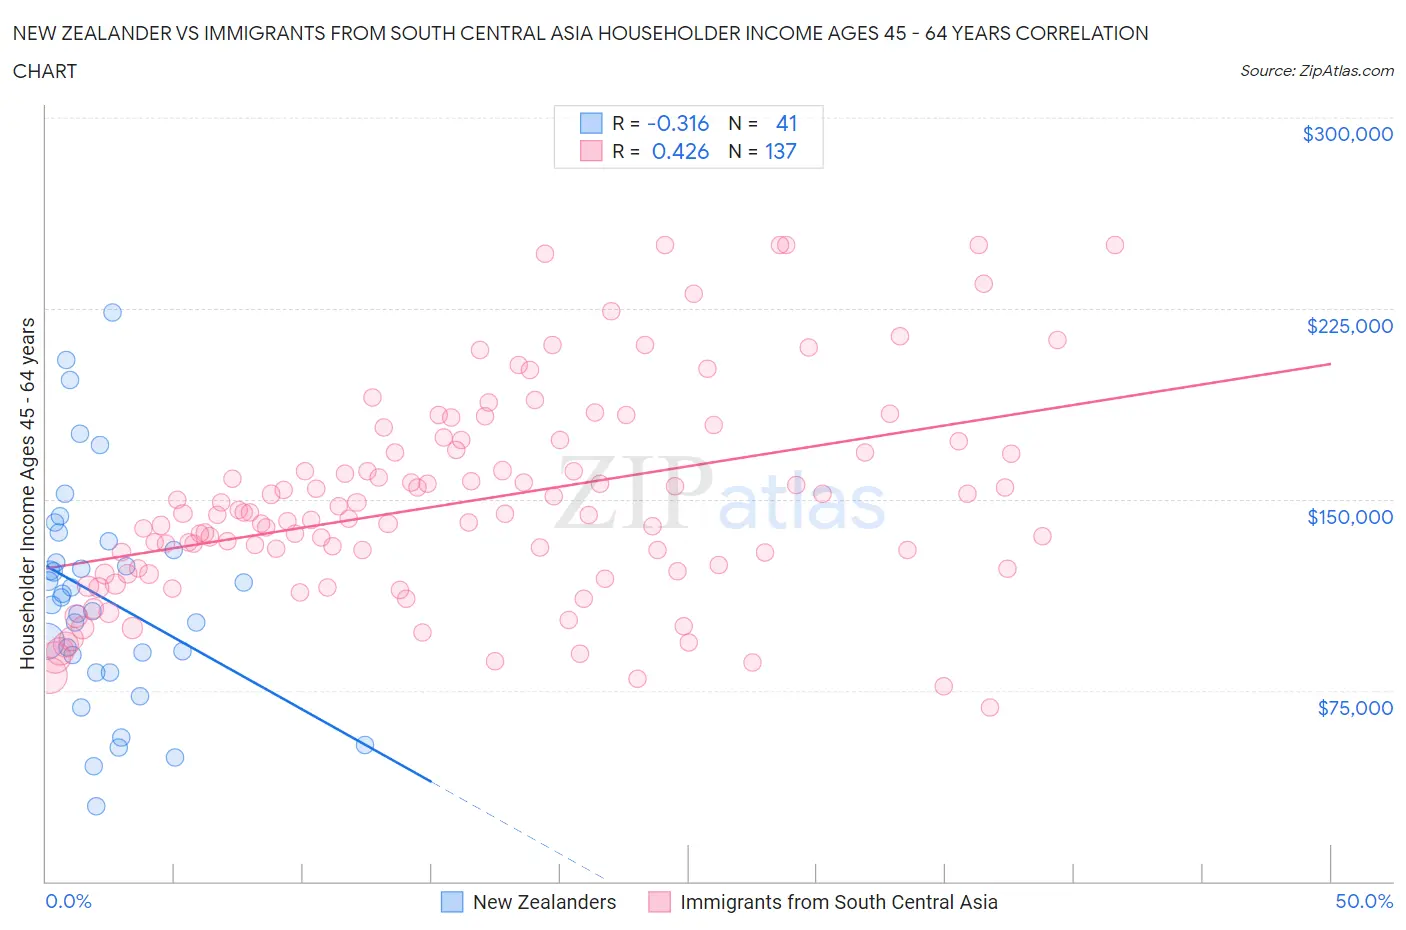 New Zealander vs Immigrants from South Central Asia Householder Income Ages 45 - 64 years